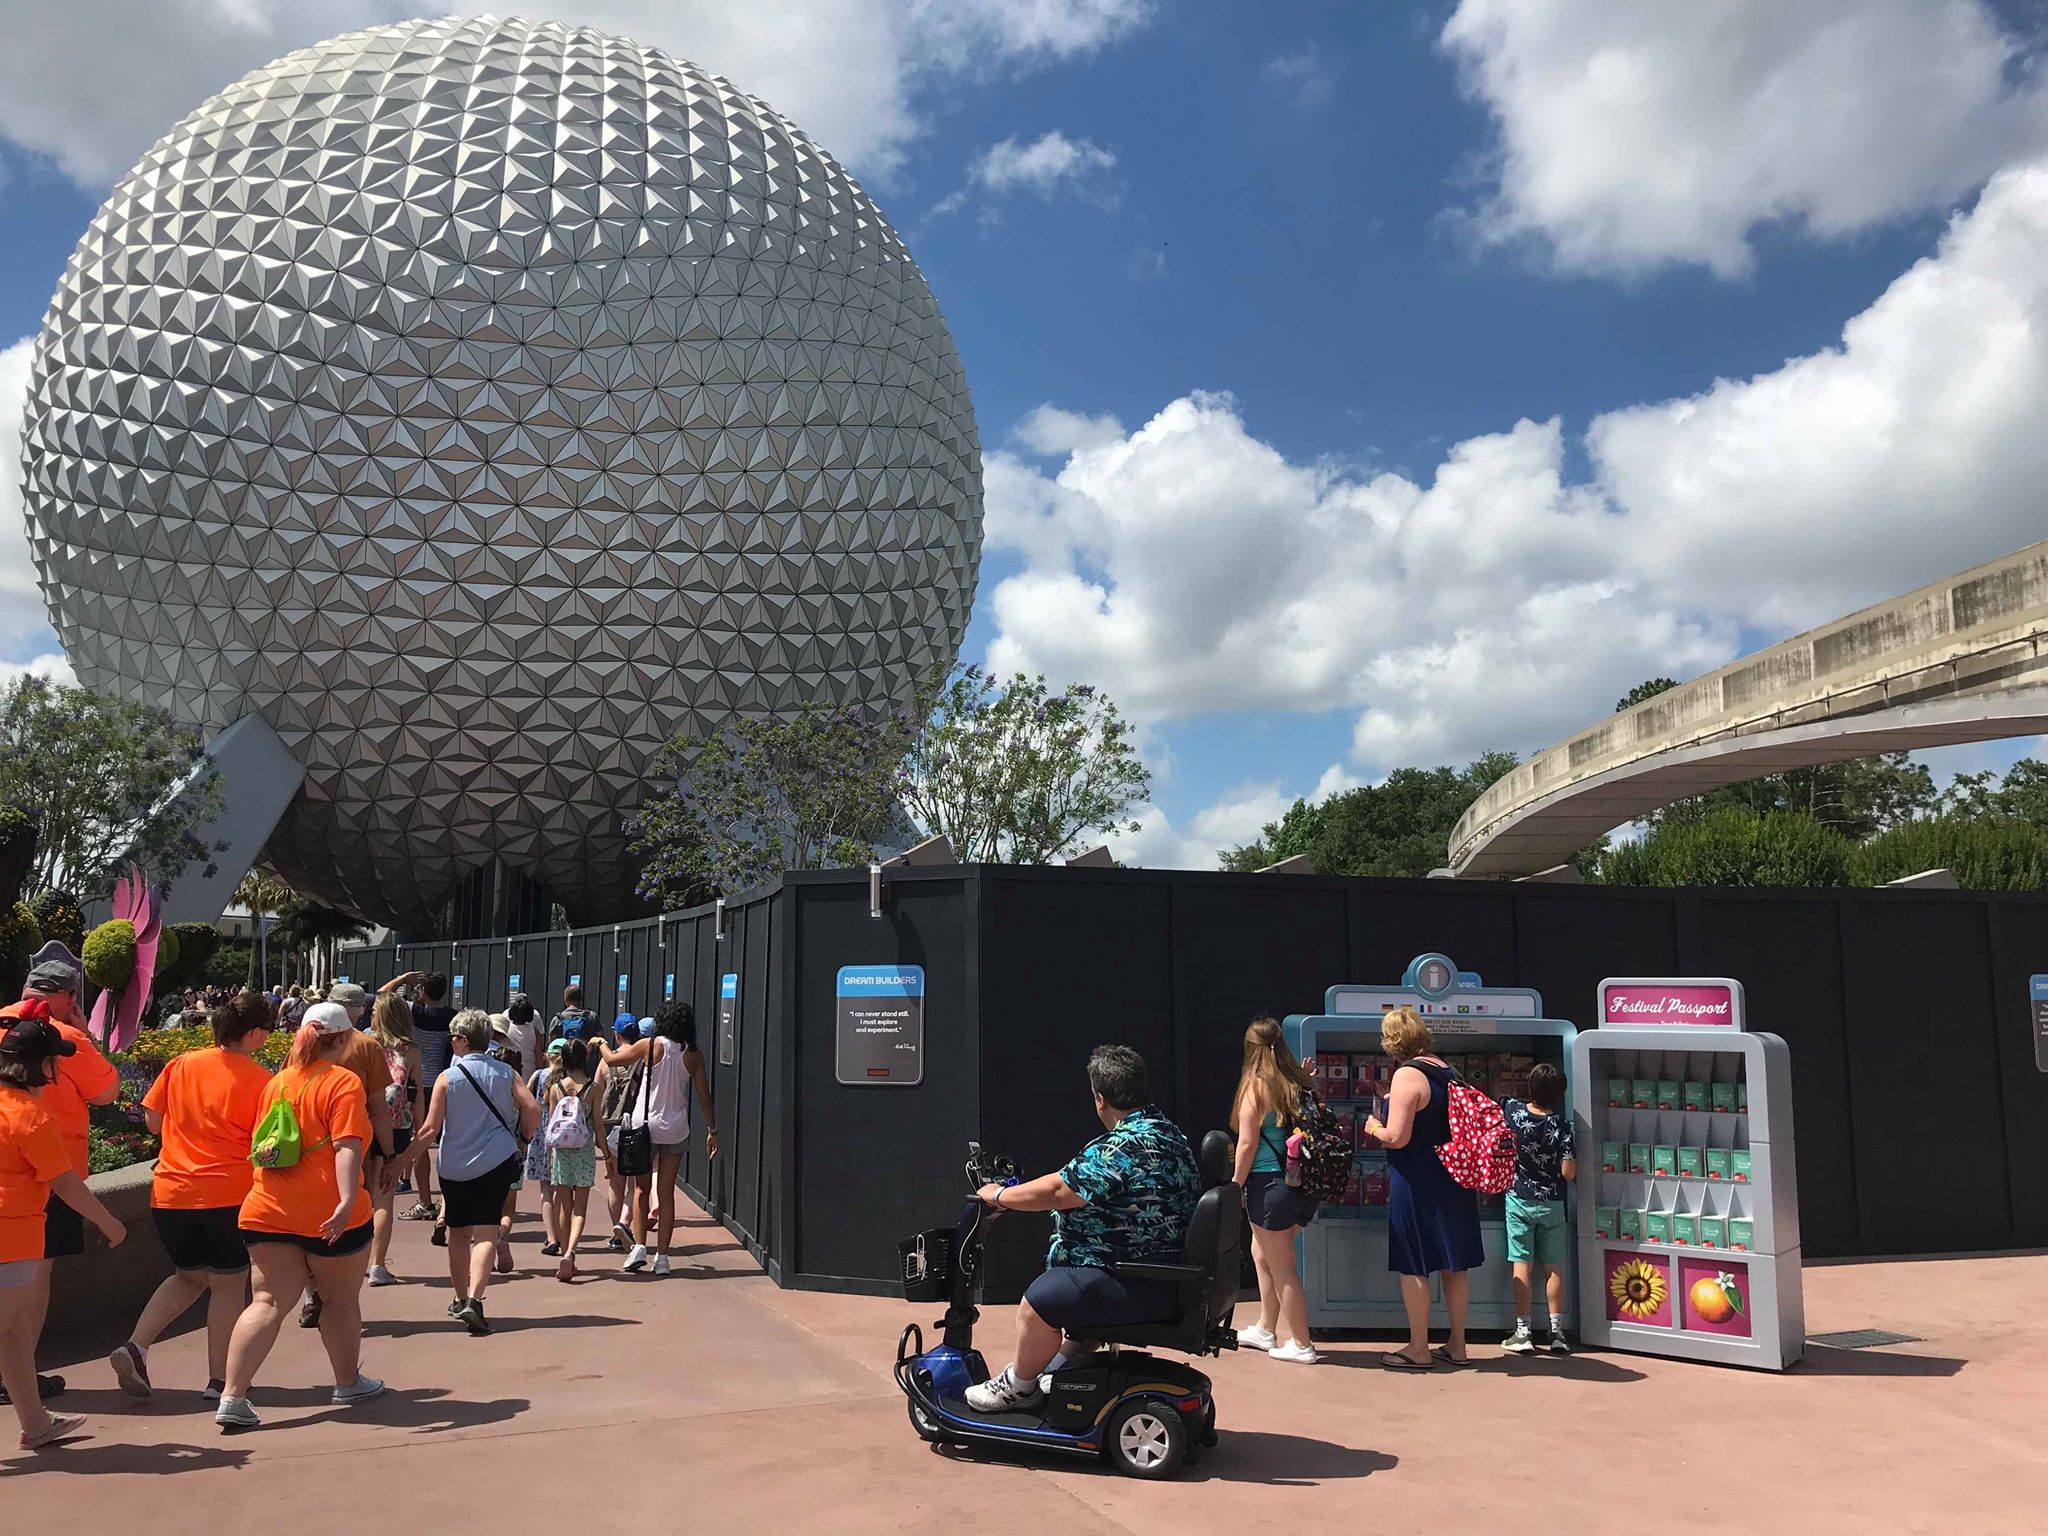 Leave A Legacy Removal Begins At Epcot